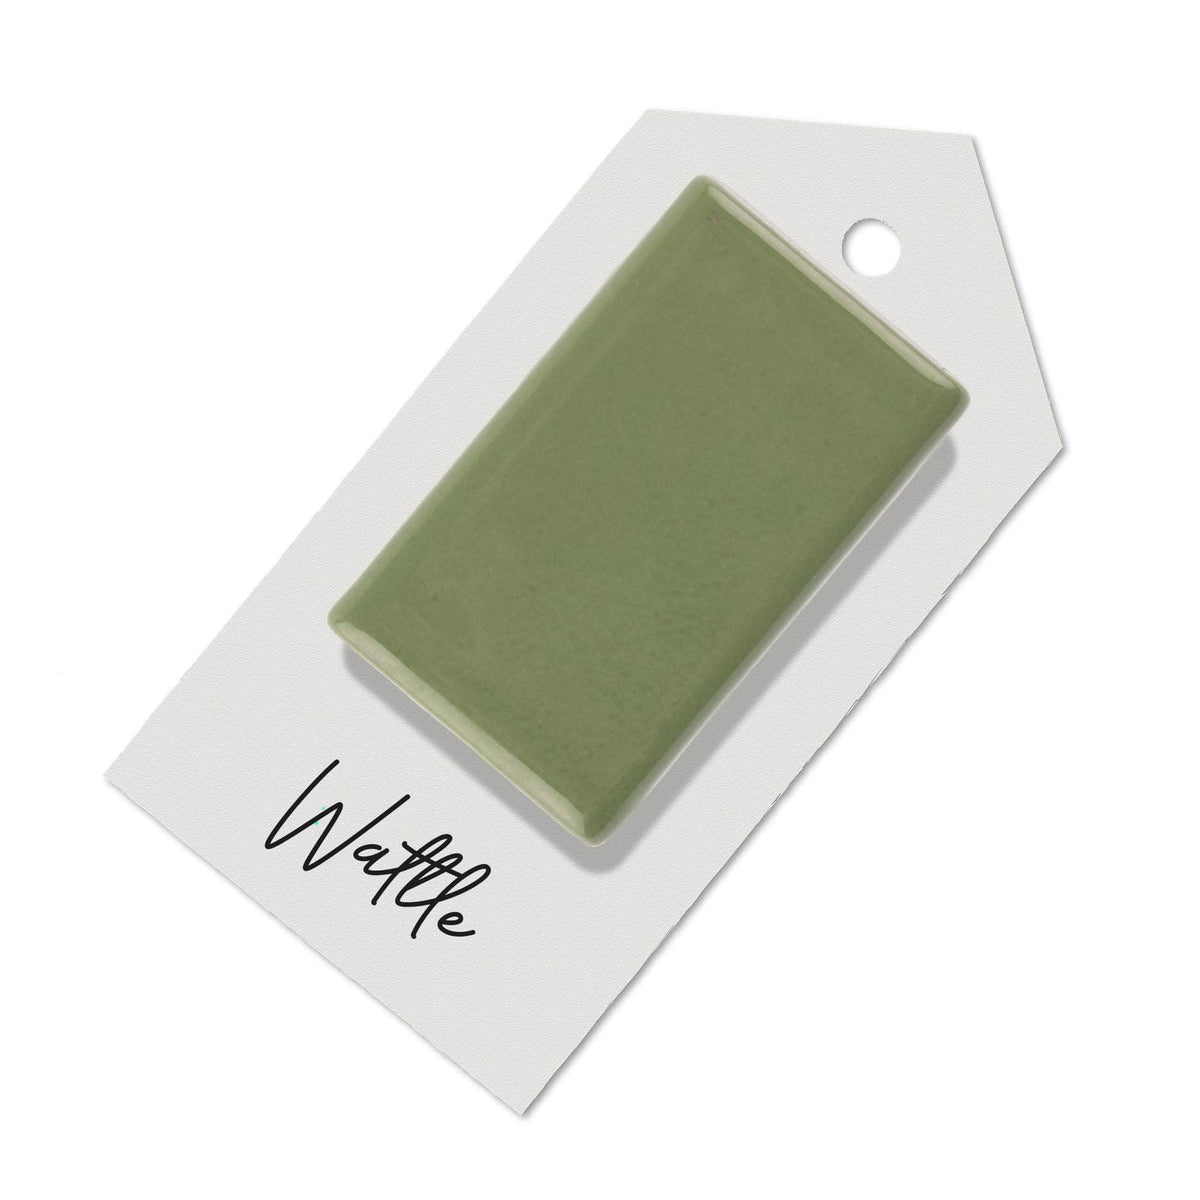 64. Wattle sample for Aga range cooker re-enamelling &amp; reconditioned cookers